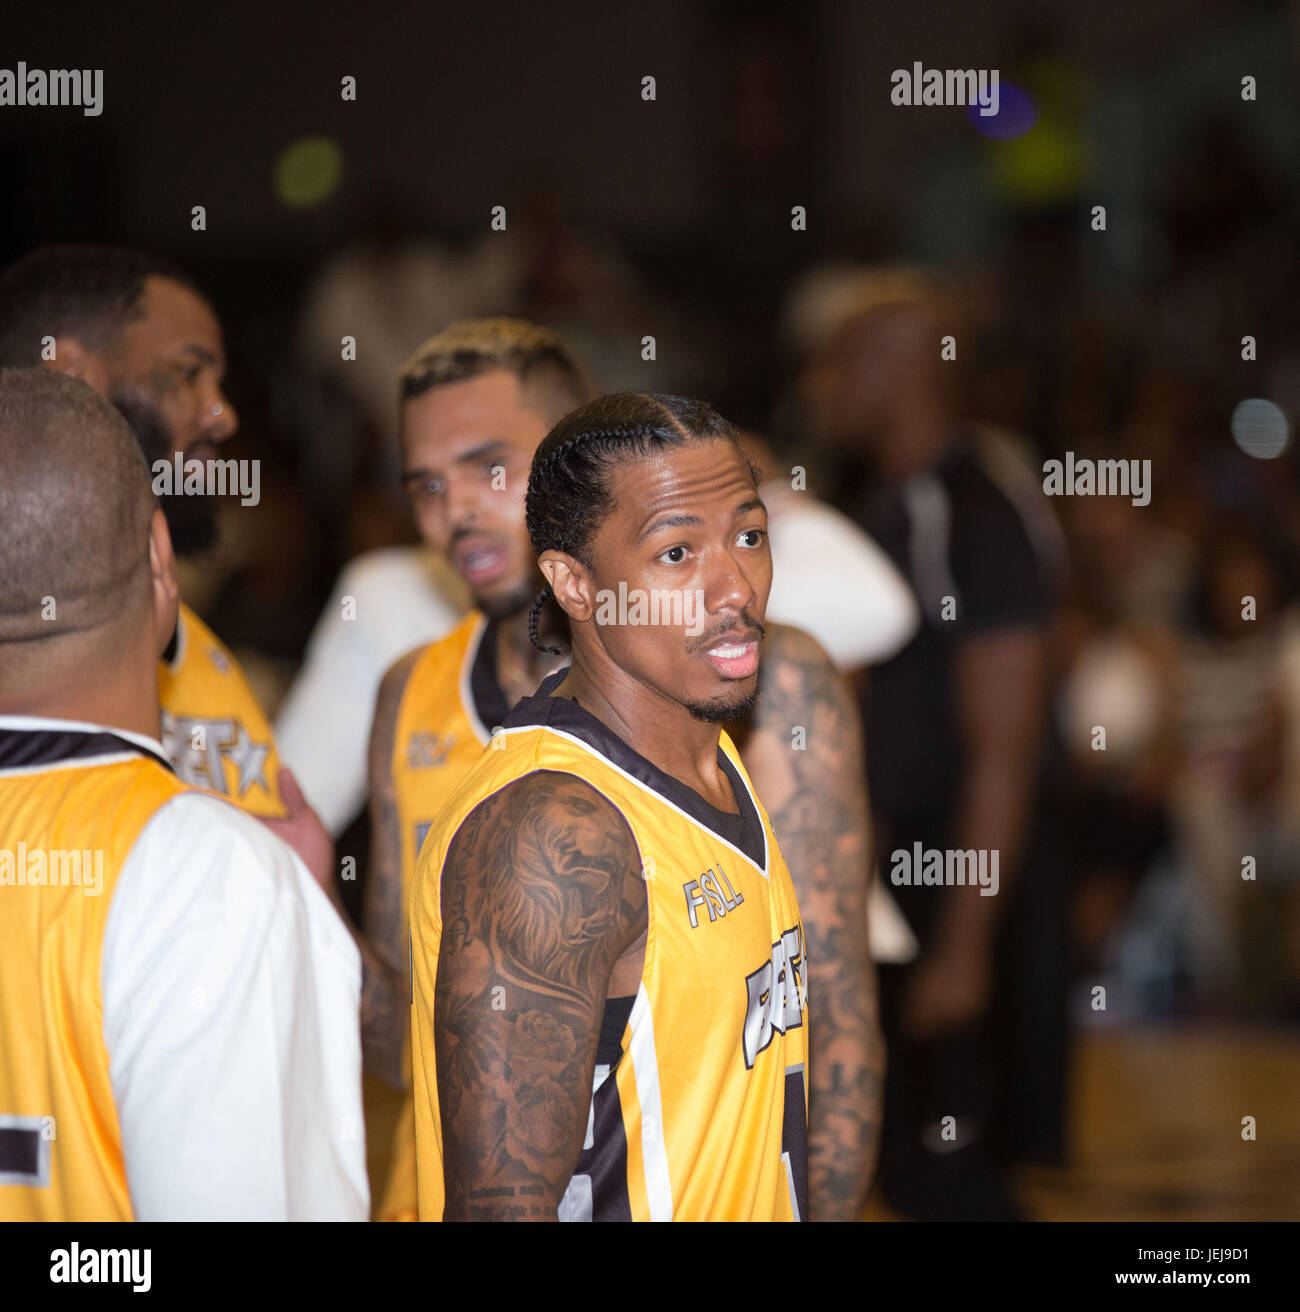 Los Angeles,USA. 24th June,2017. Nick Cannon Celebrity Basketball Game,presented by Sprite State Farm,during 2017 BET Experience,at Los Angeles Convention Center June 24,2017 Los Angeles,California. Stock Photo